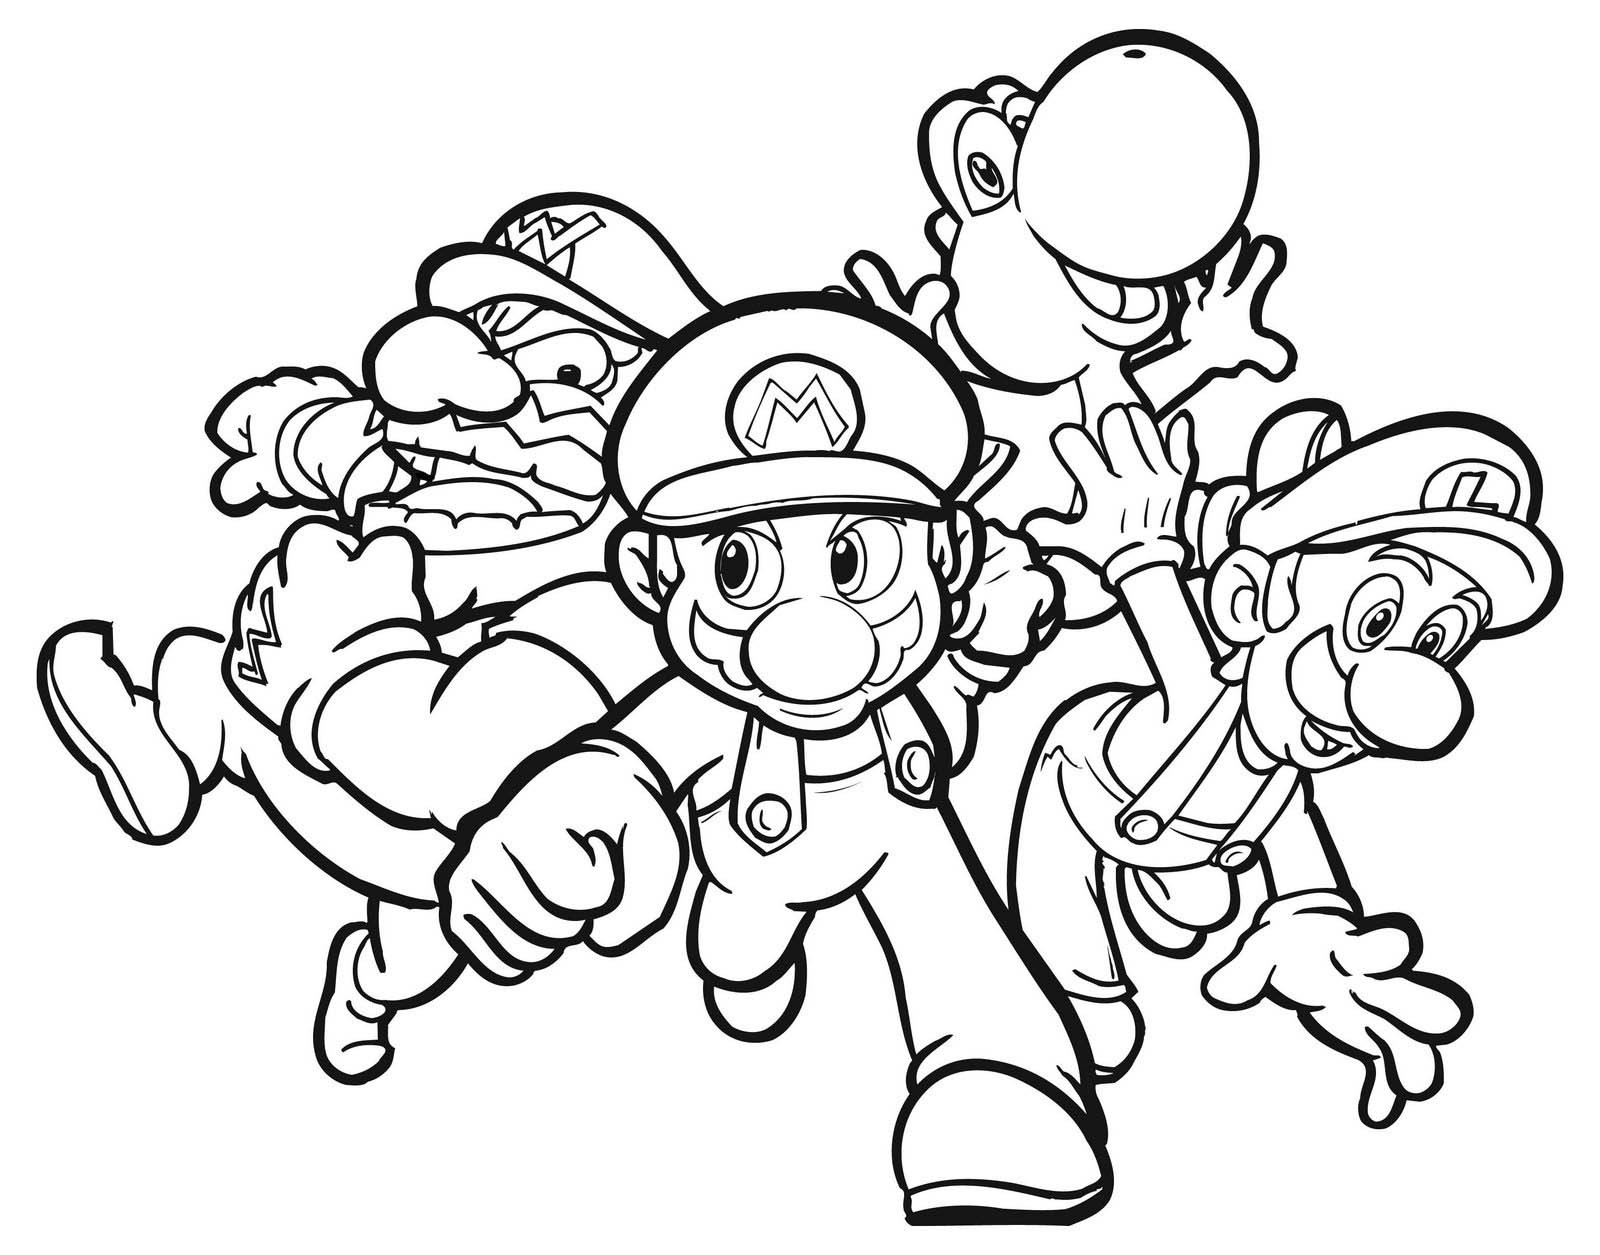 Mario Printable Coloring Pages
 Free Printable Coloring Pages Cool Coloring Pages Super